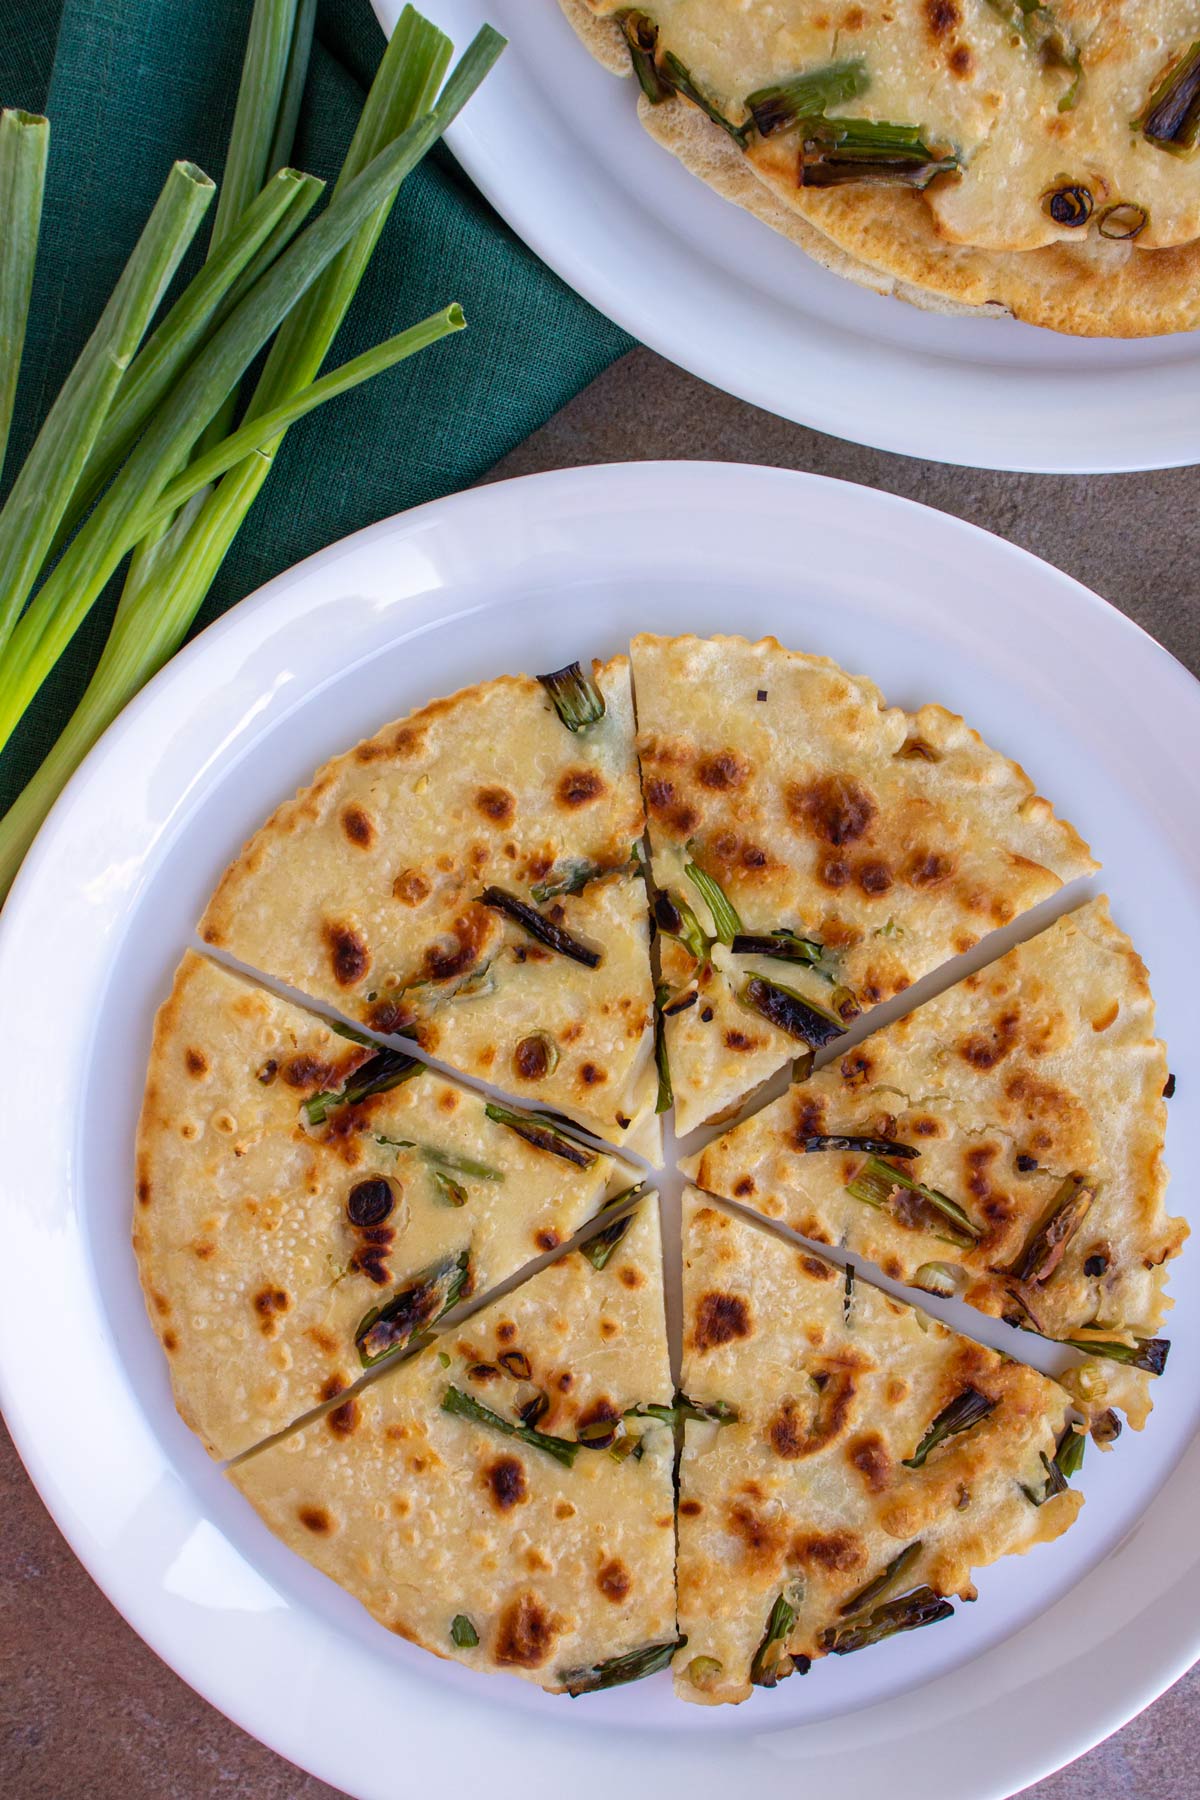 A scallion pancake cut into wedges next to a green linen napkin topped with scallions.